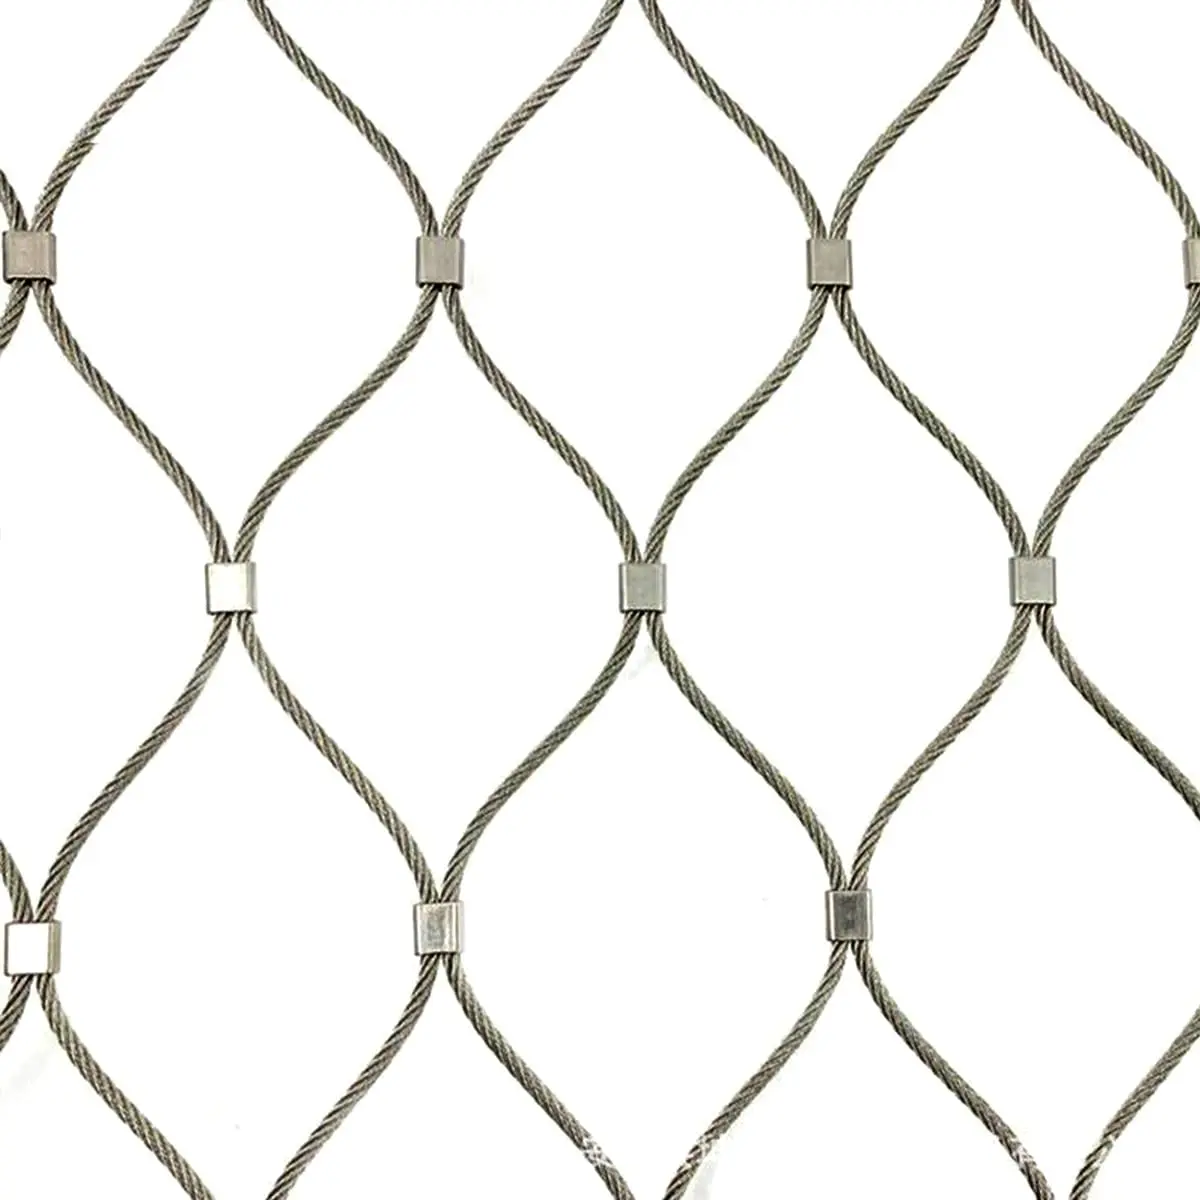 FengYoo Stainless Steel Garden Netting 12 Gauge 40X80 Deer Wire Fence -3Mesh- Safety Netting Animal Barrier Fence Poultry Nettin